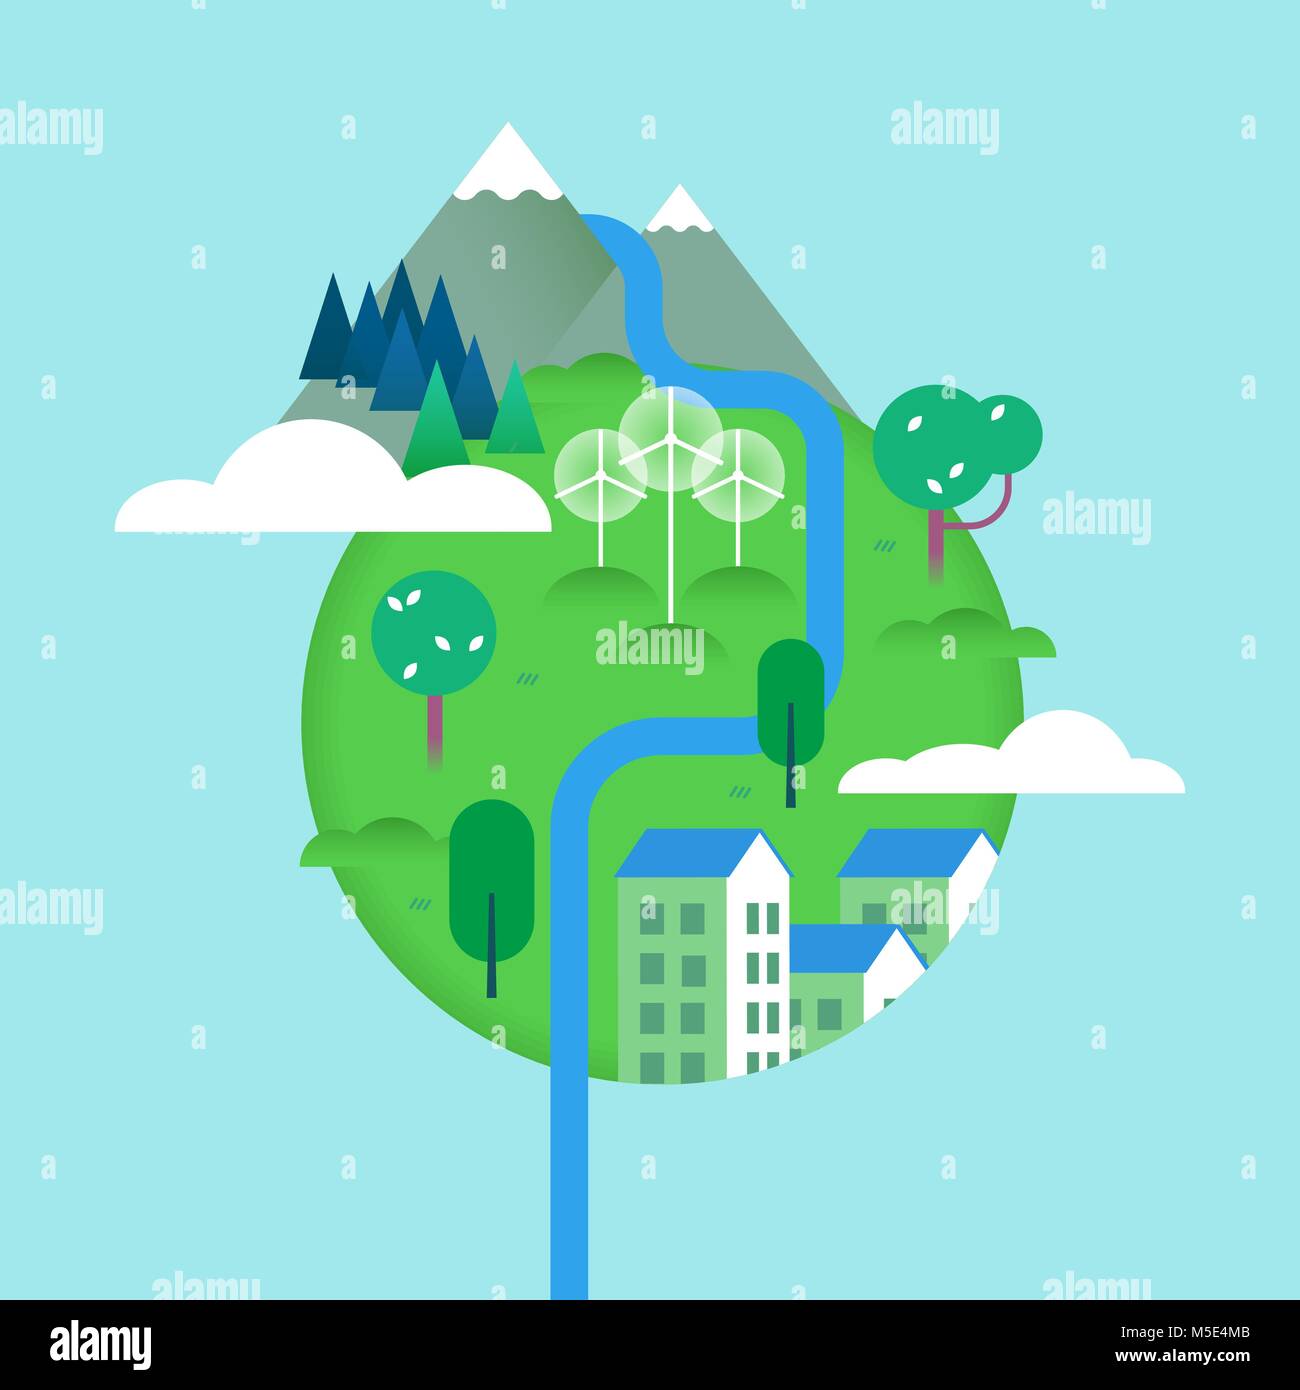 Green world illustration with nature elements and houses, environment conservation concept of planet earth. Includes mountain landscape, river, trees, Stock Vector